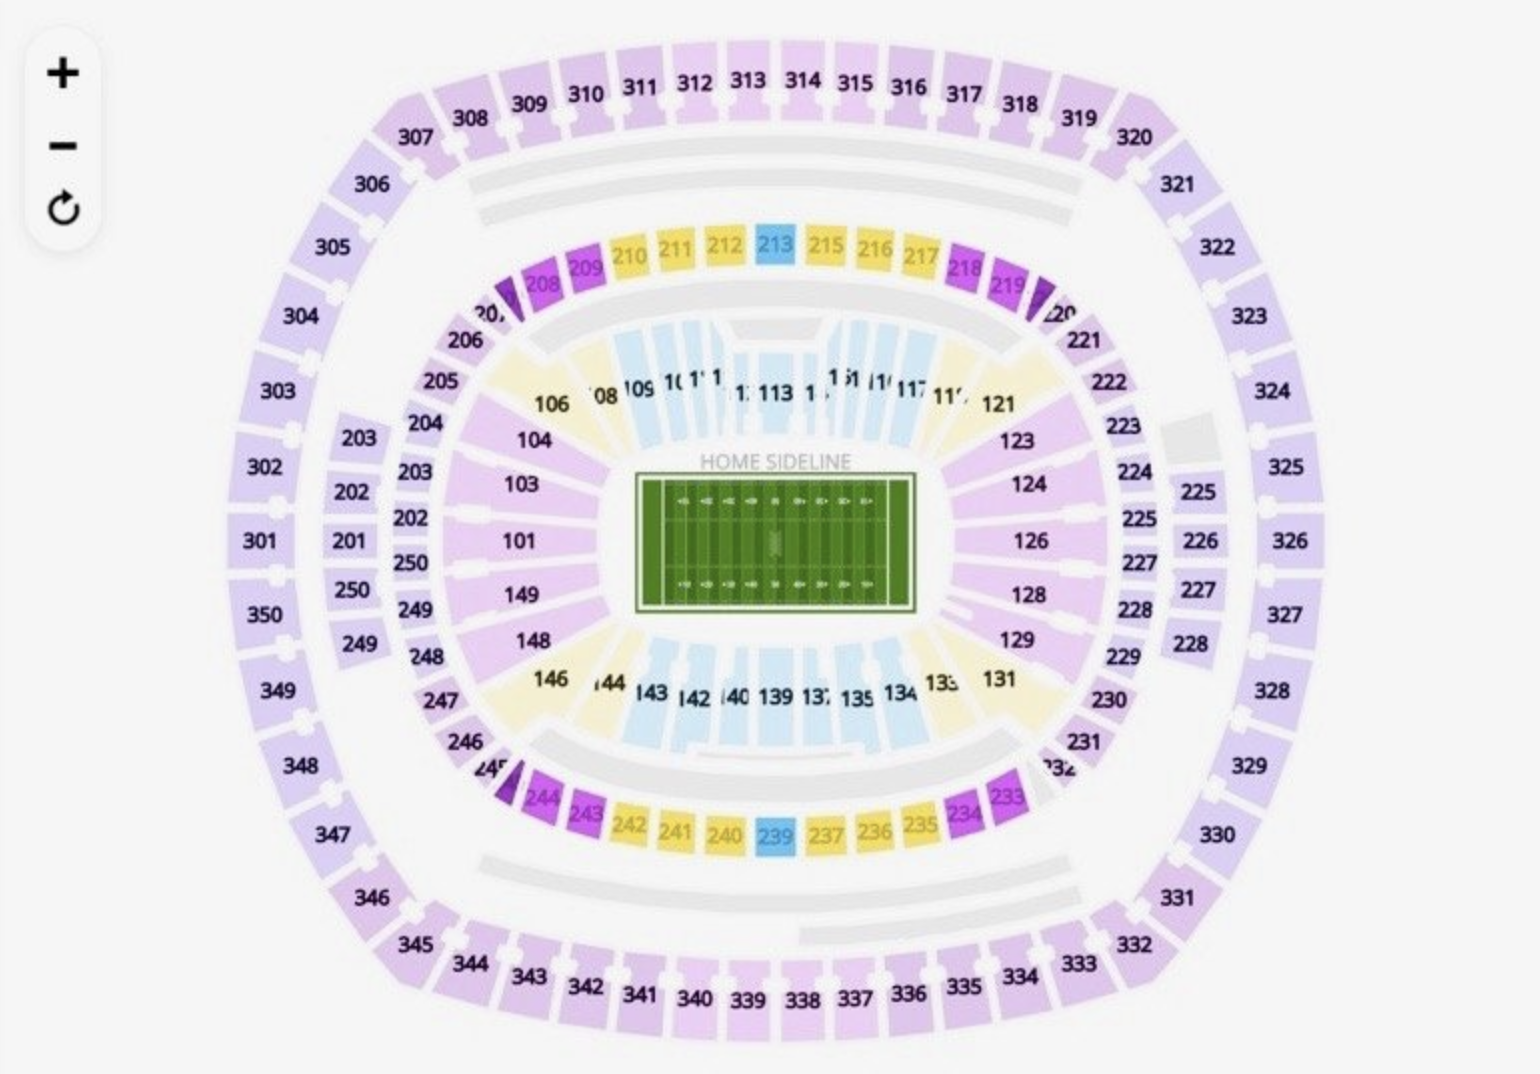 Where to Find MetLife Stadium Premium Seating and Club Options